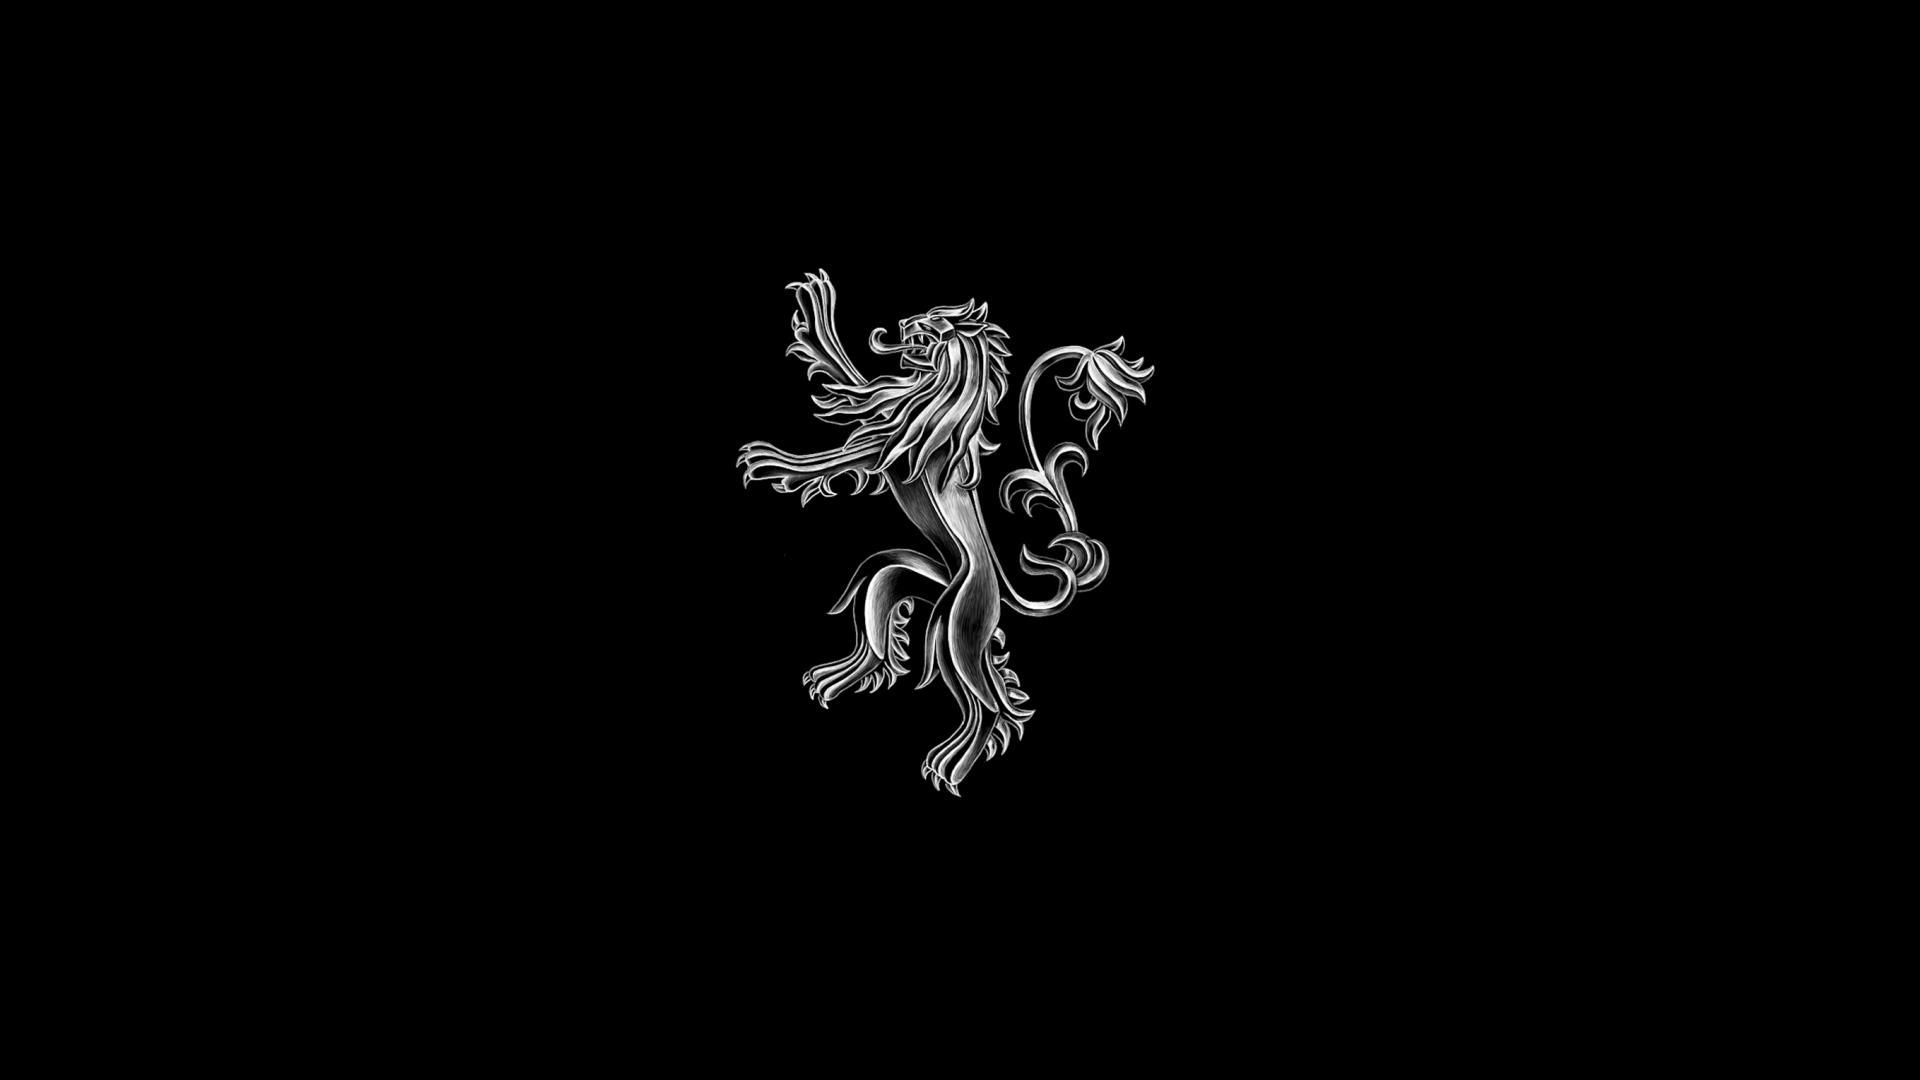 Game Of Thrones Sigils Lion House Lannister 1920x1080